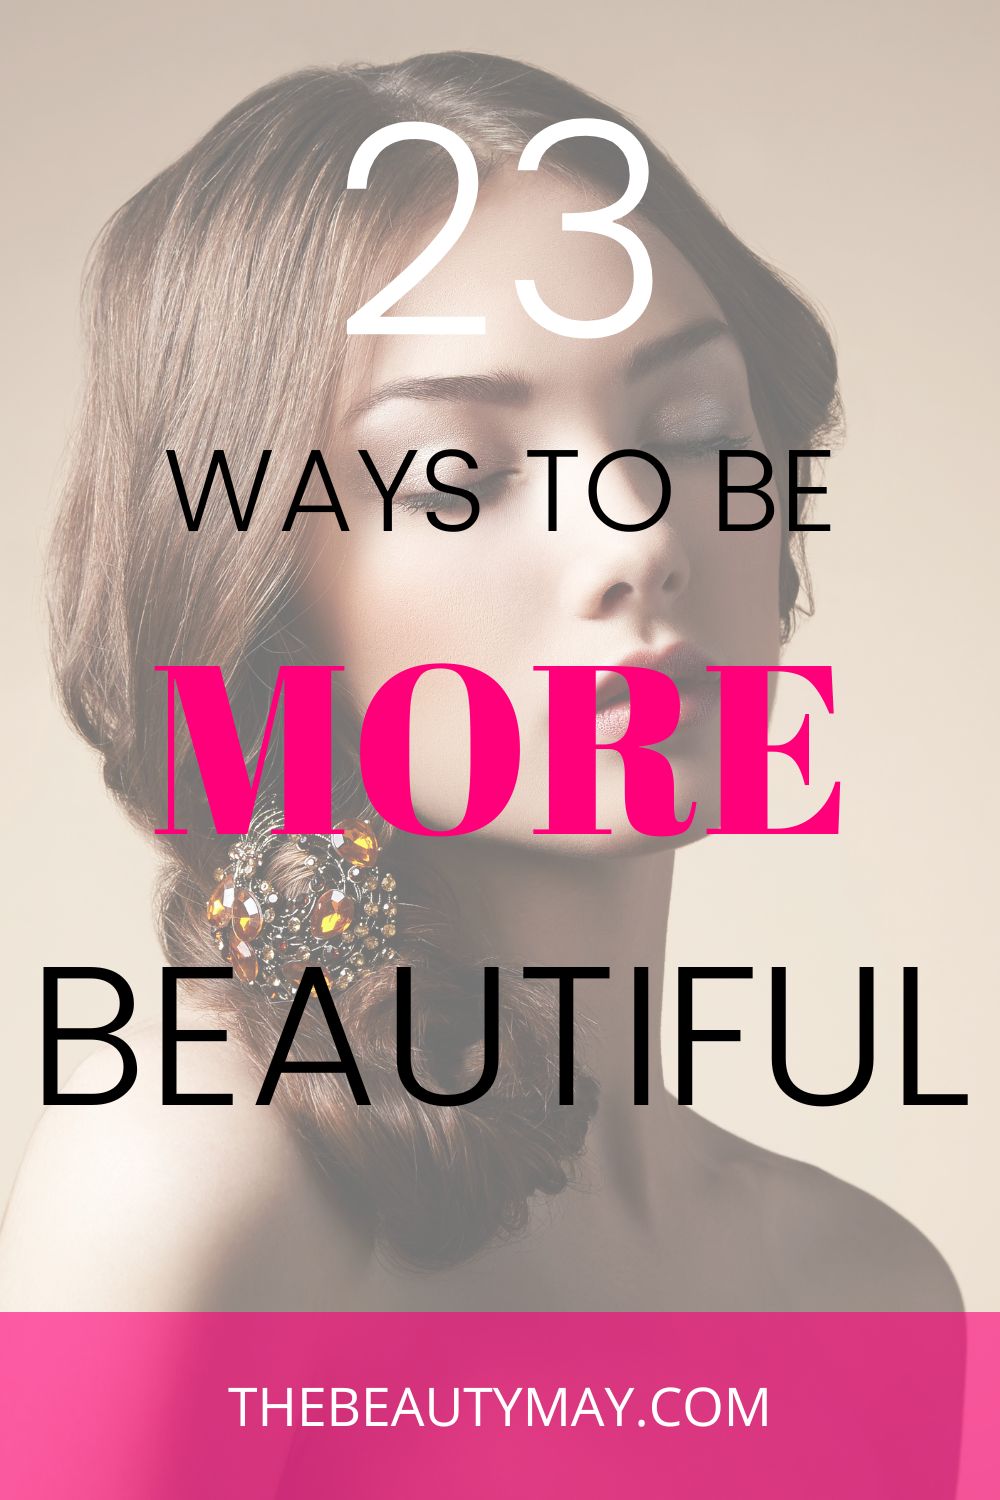 how to be more attractive